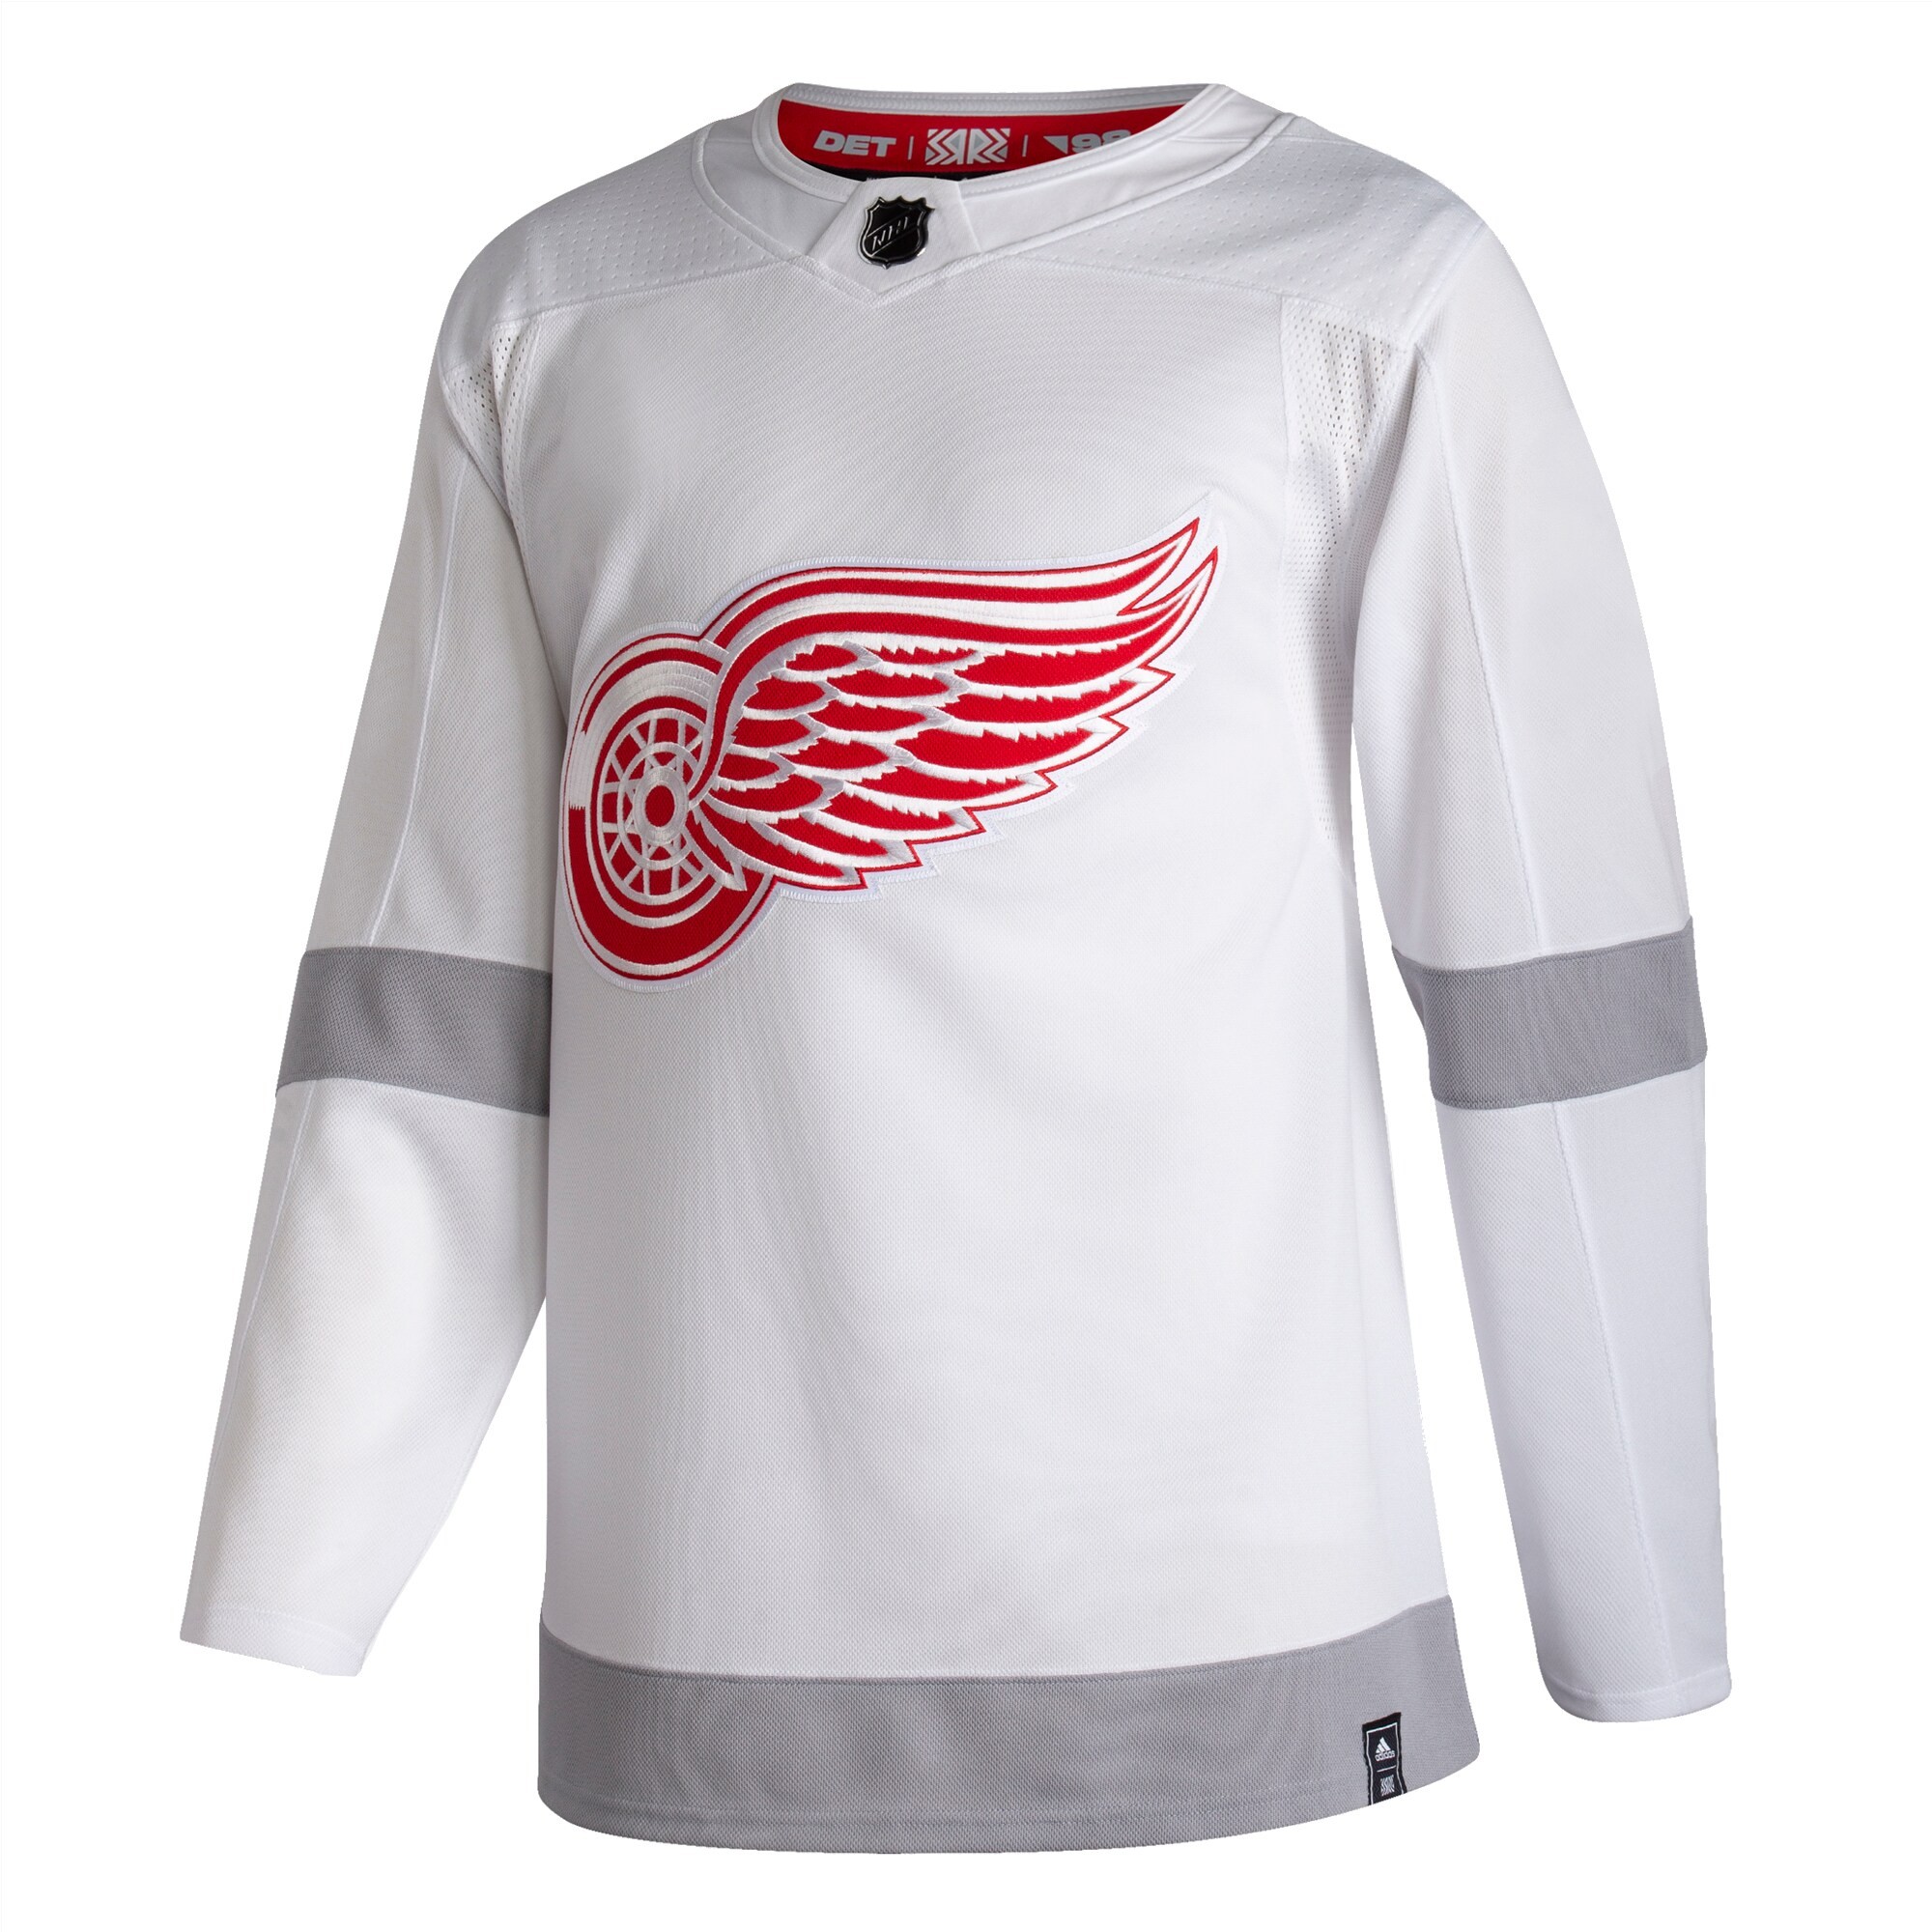 5 ideas for Detroit Red Wings' next 'Reverse Retro' jersey